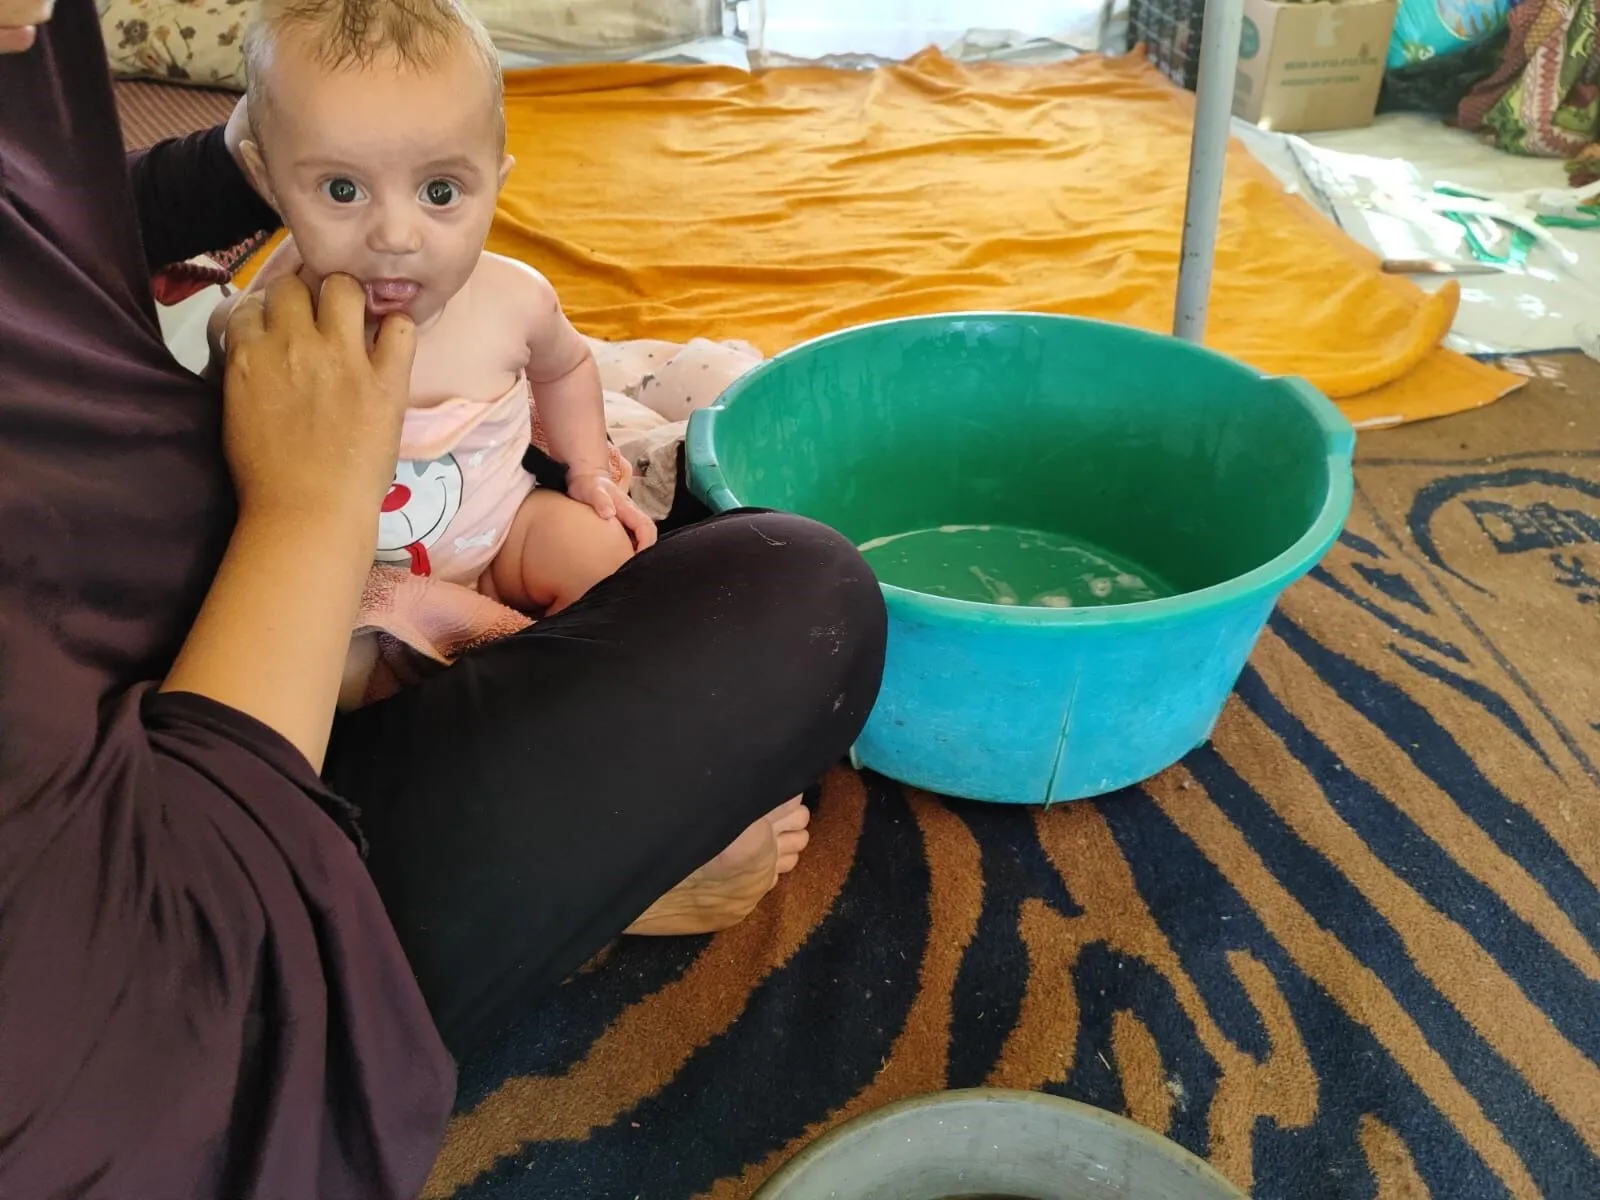 A displaced Palestinian mother is seen washing her little child inside a makeshift tent.